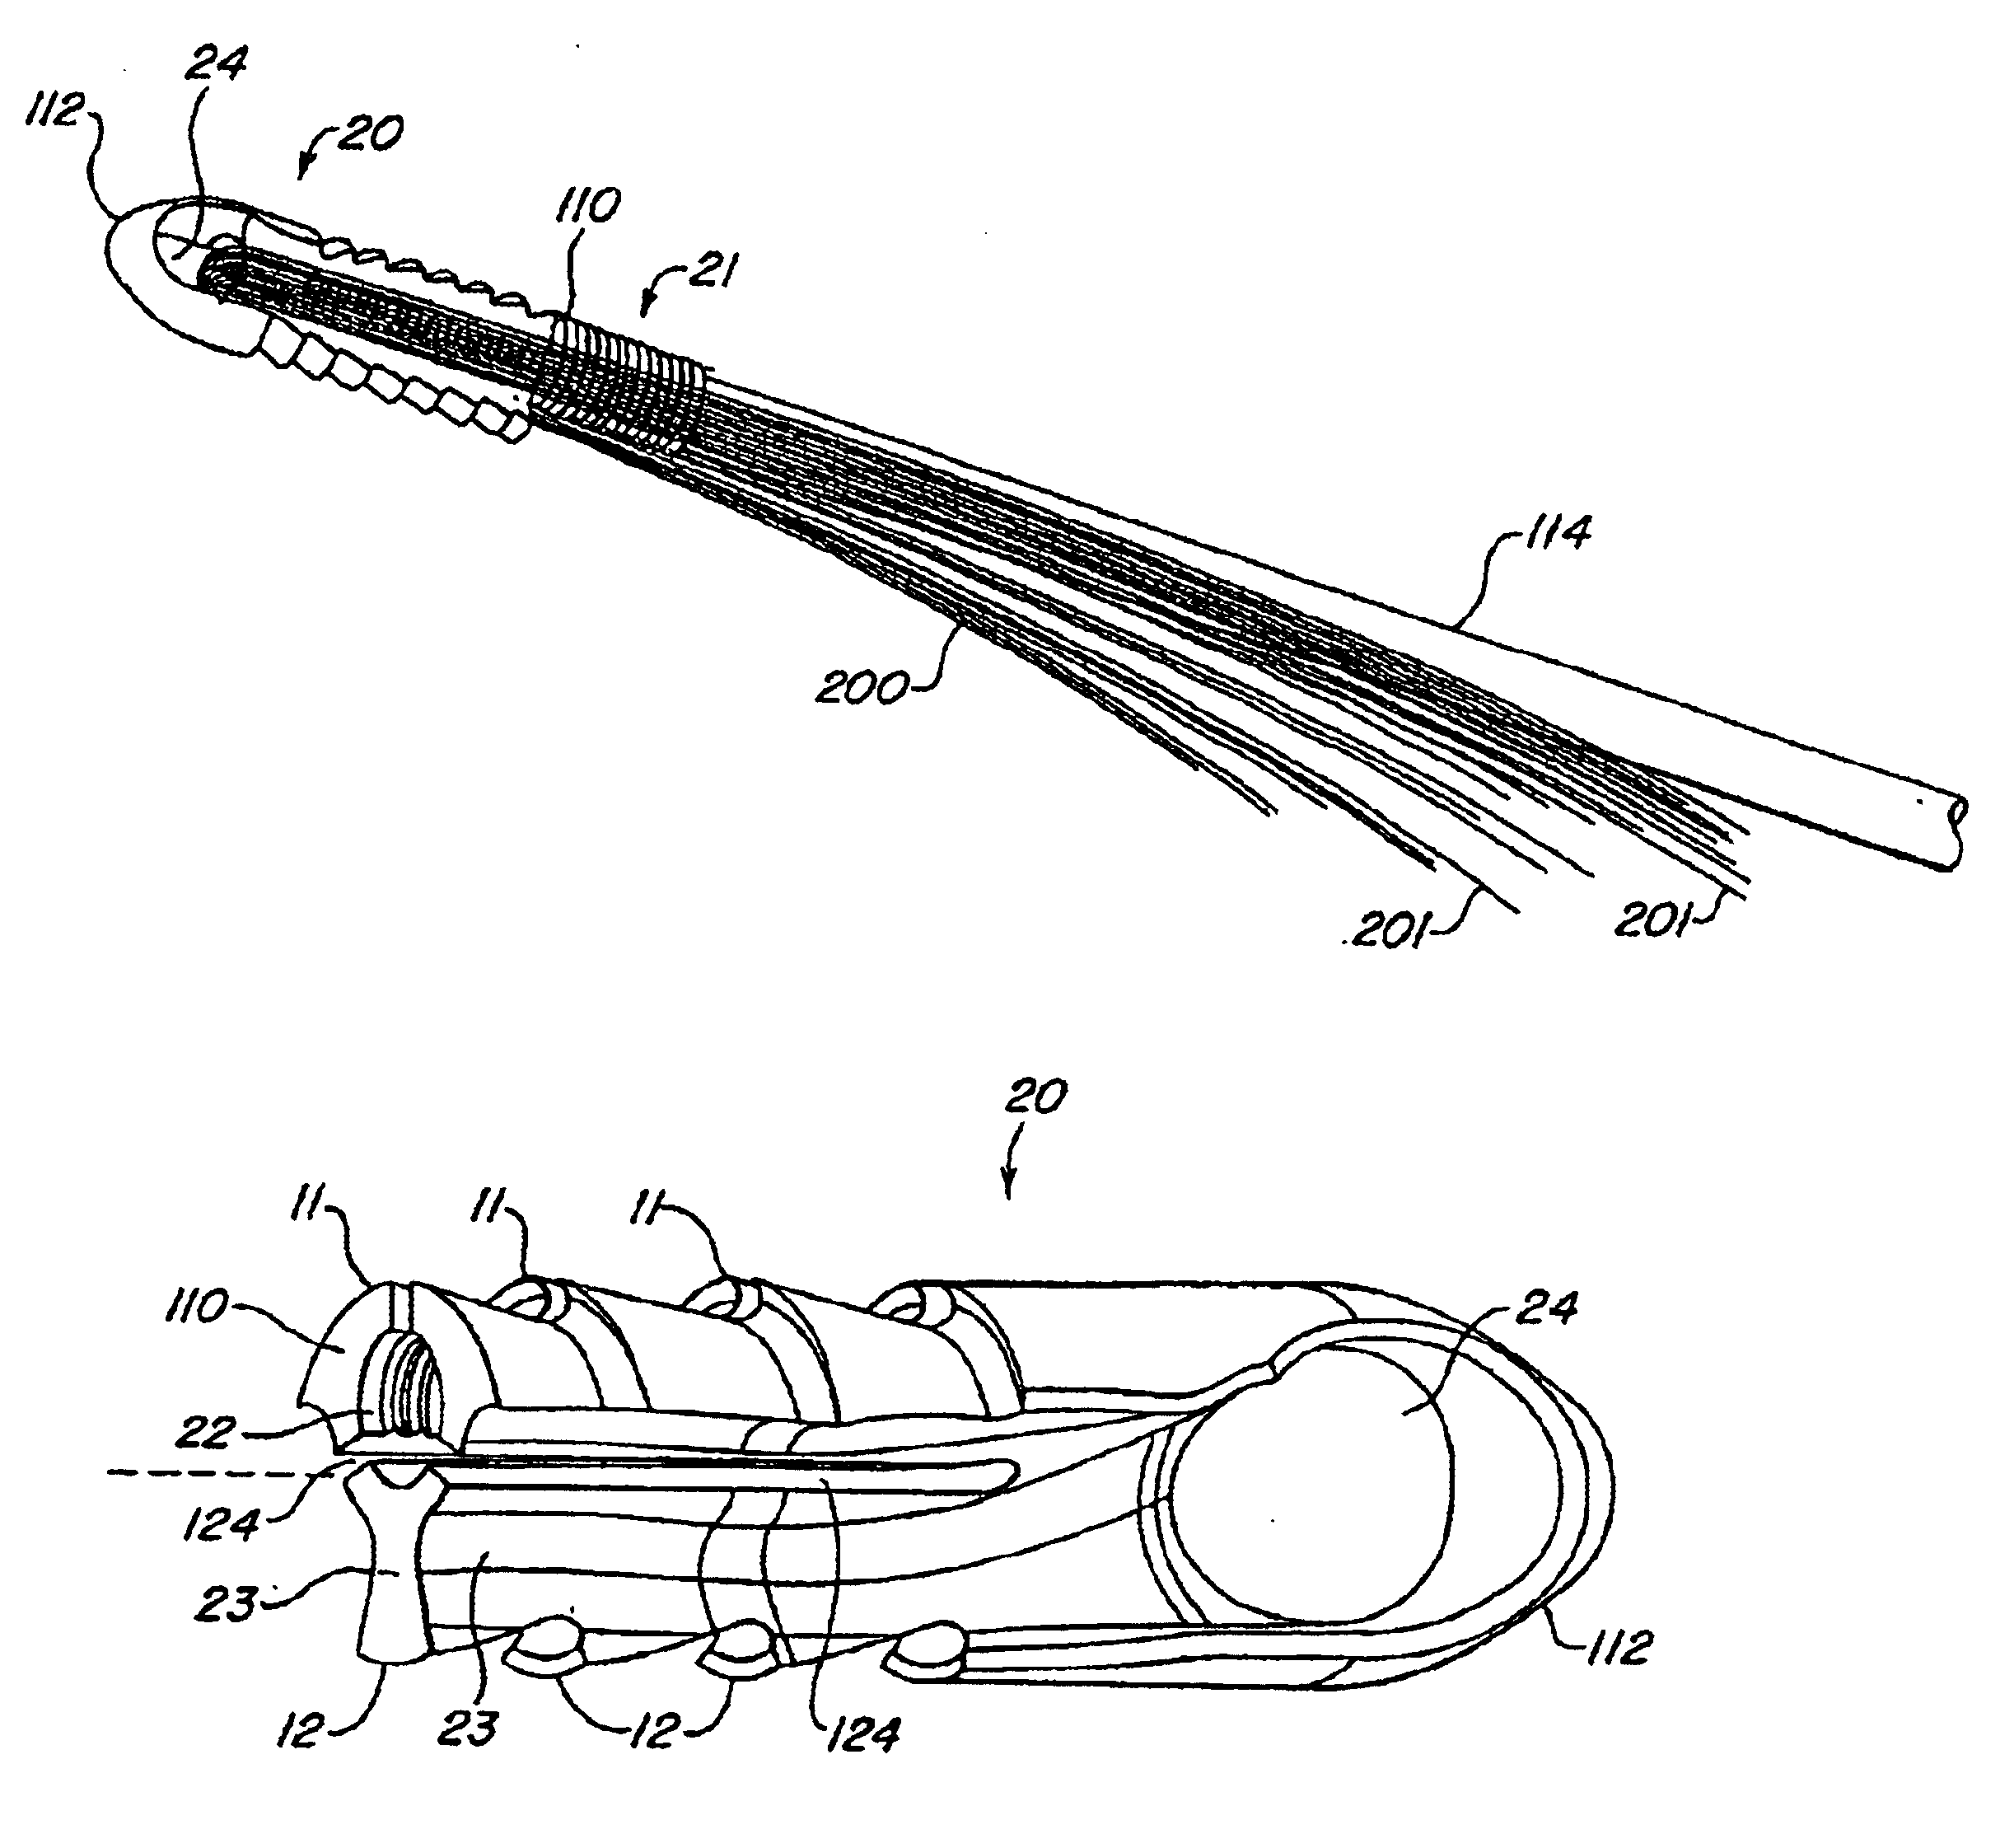 Expanding ligament graft fixation system and method